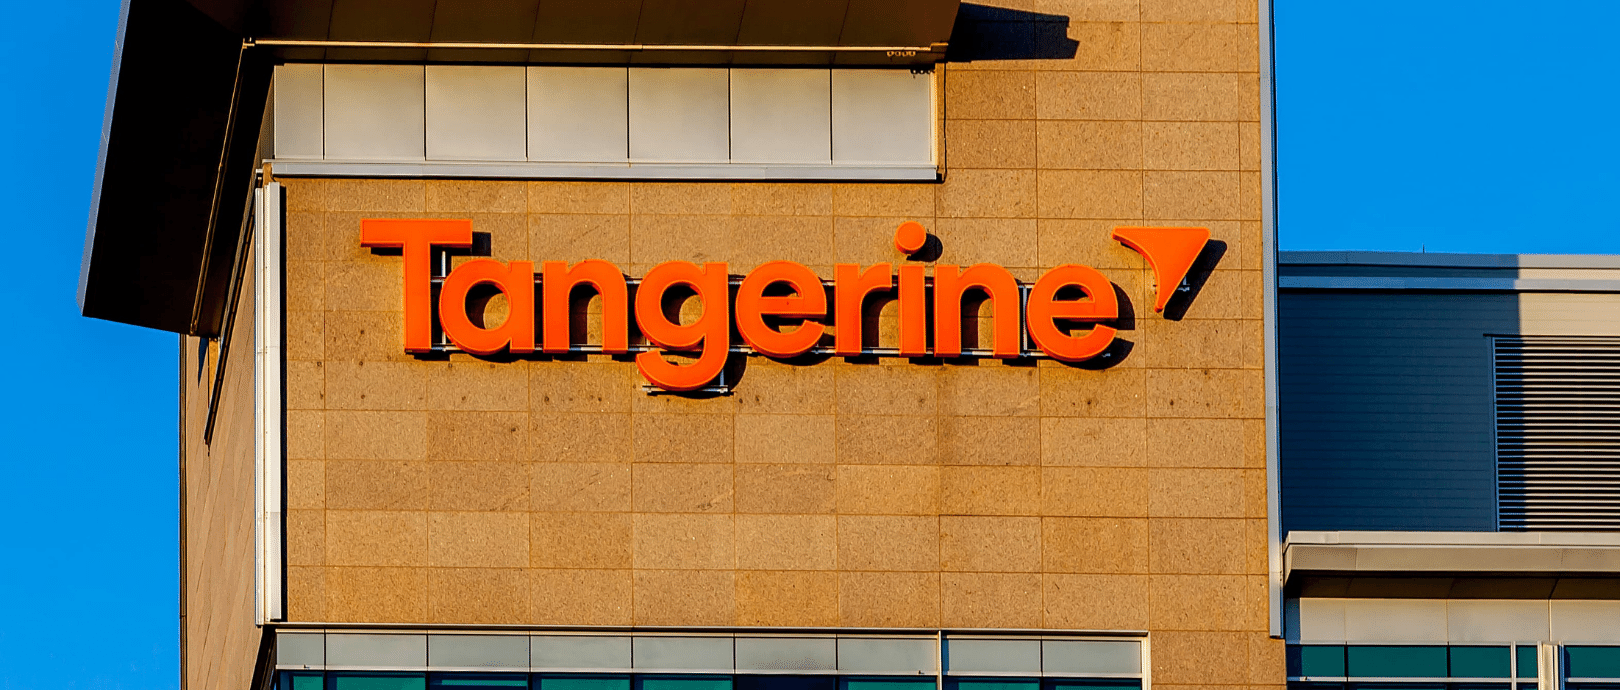 Tangerine Bank building with logo